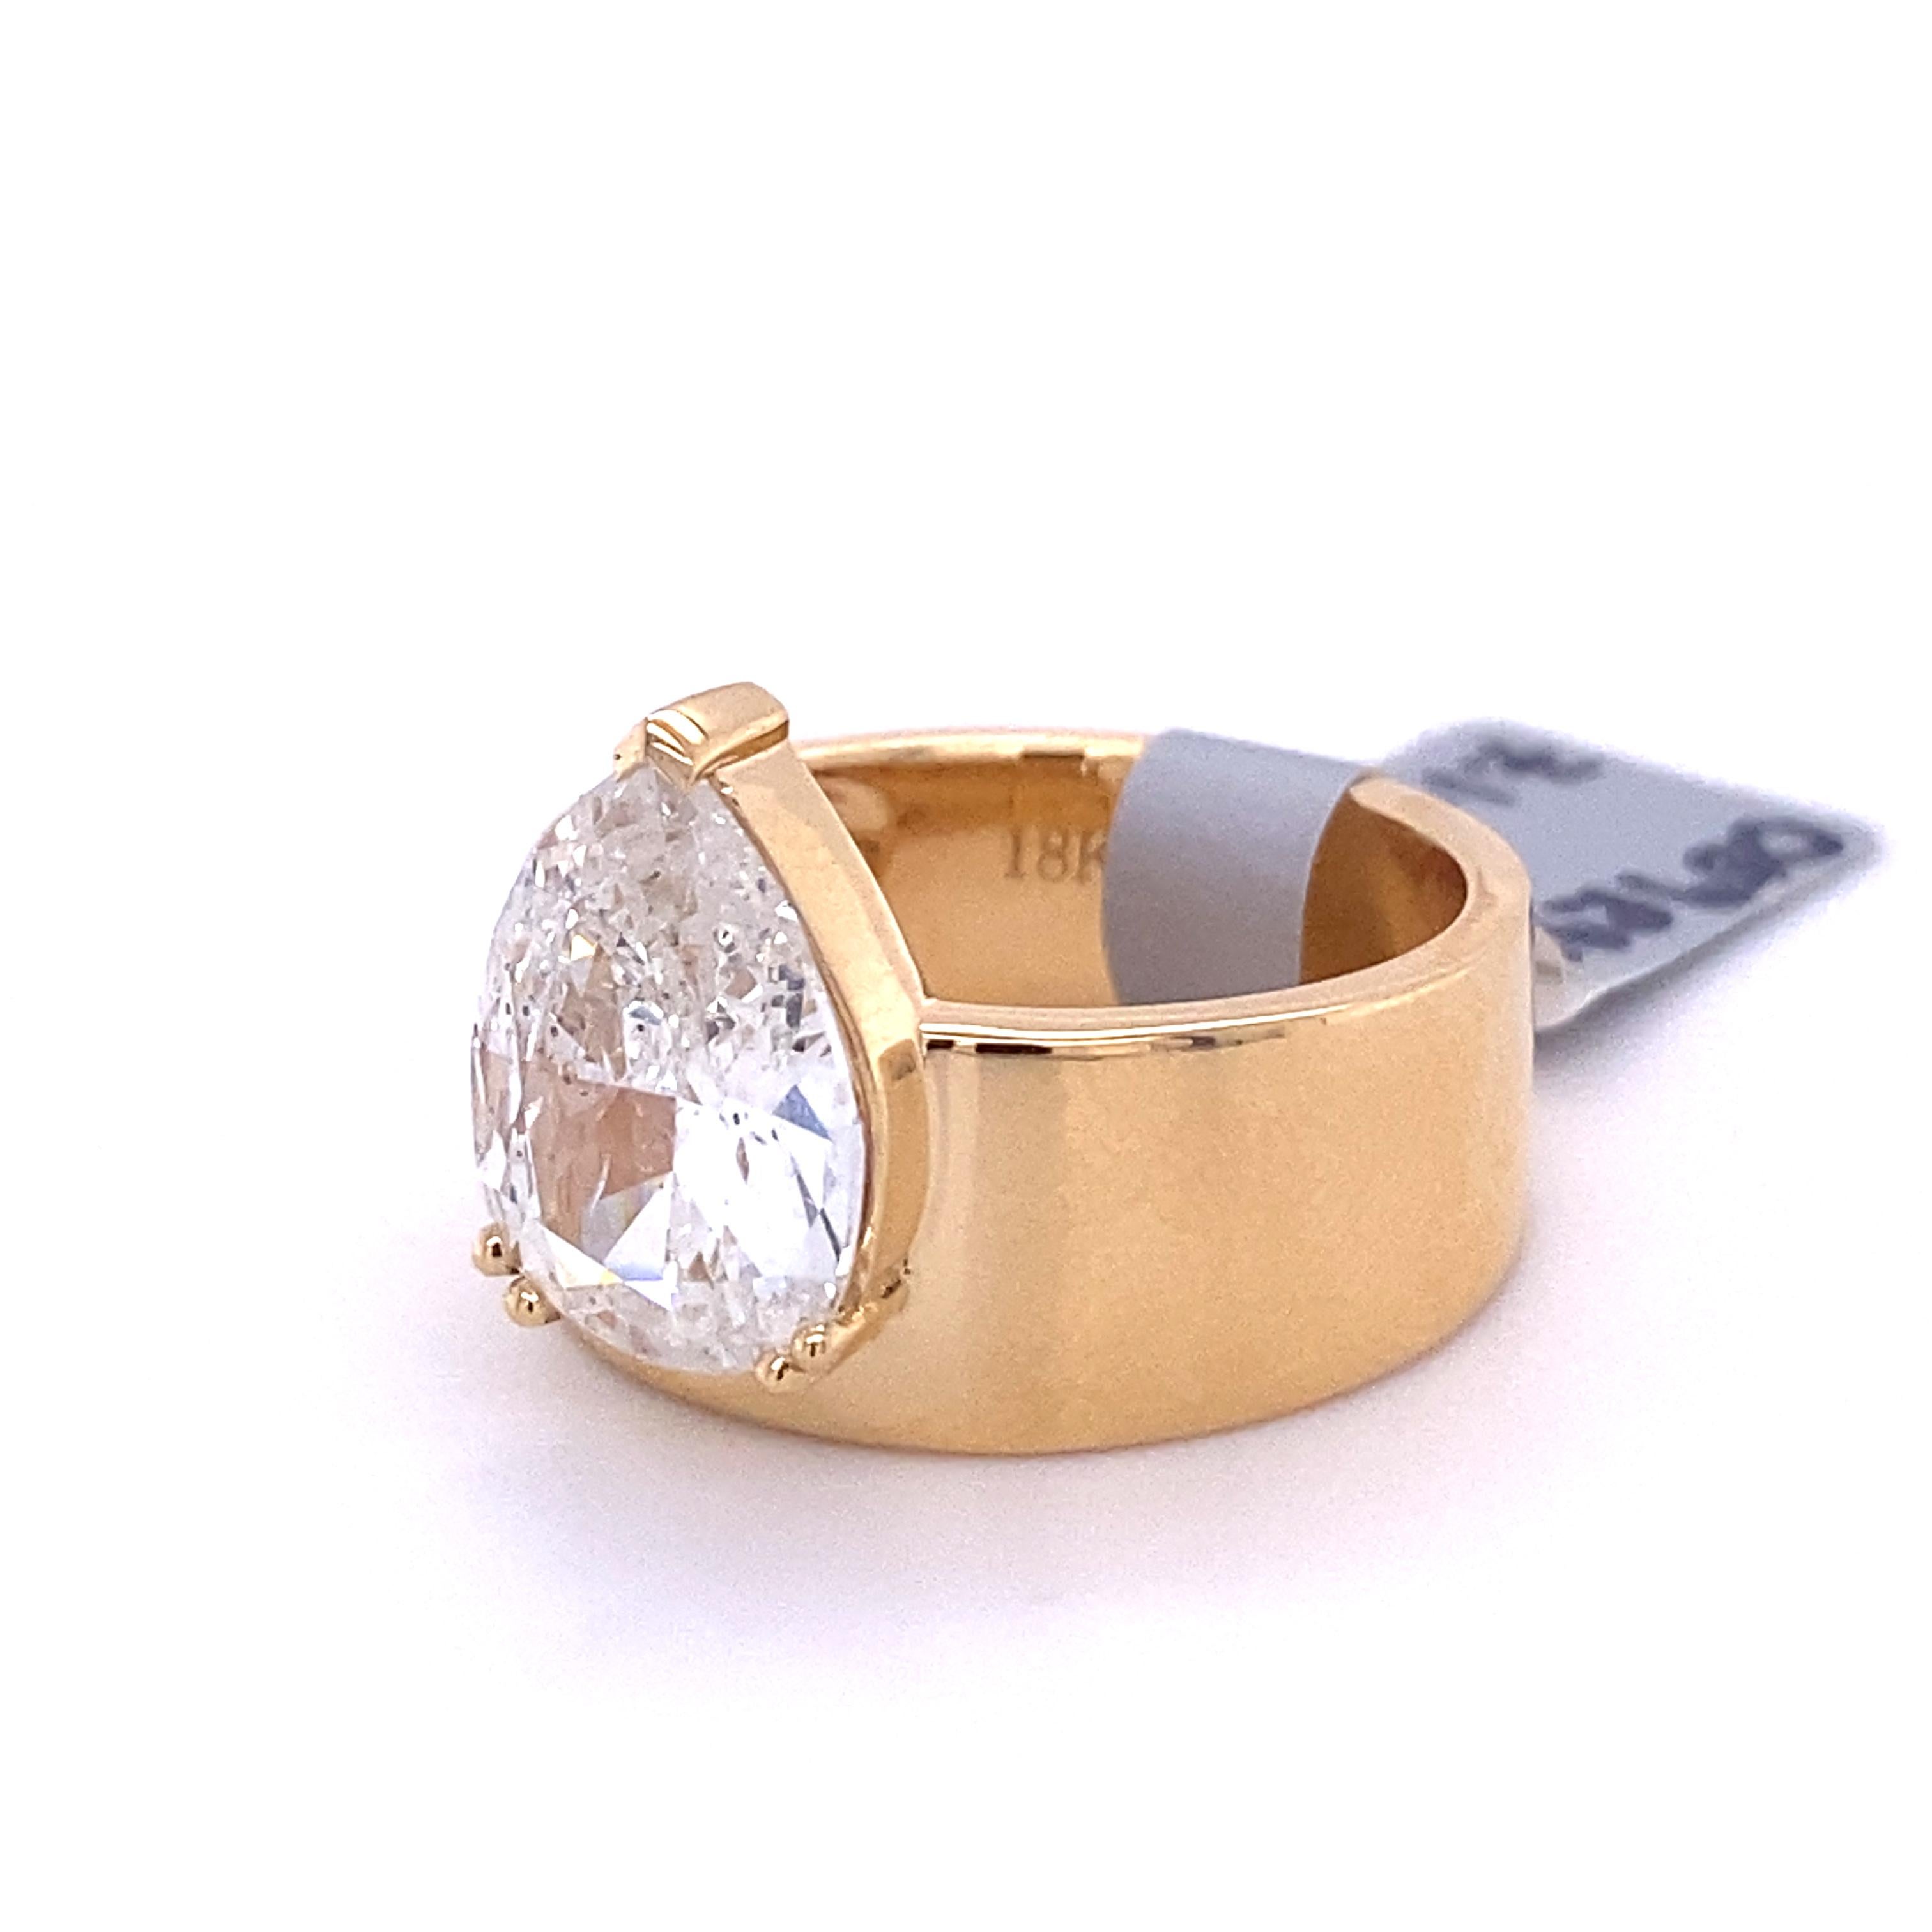 This 3.03ct pear shaped diamond ring is set in a sleek and modern 18k yellow gold band. This sparkling ring is a great piece of jewelry for those who are looking for an alternative to the traditional solitaire.